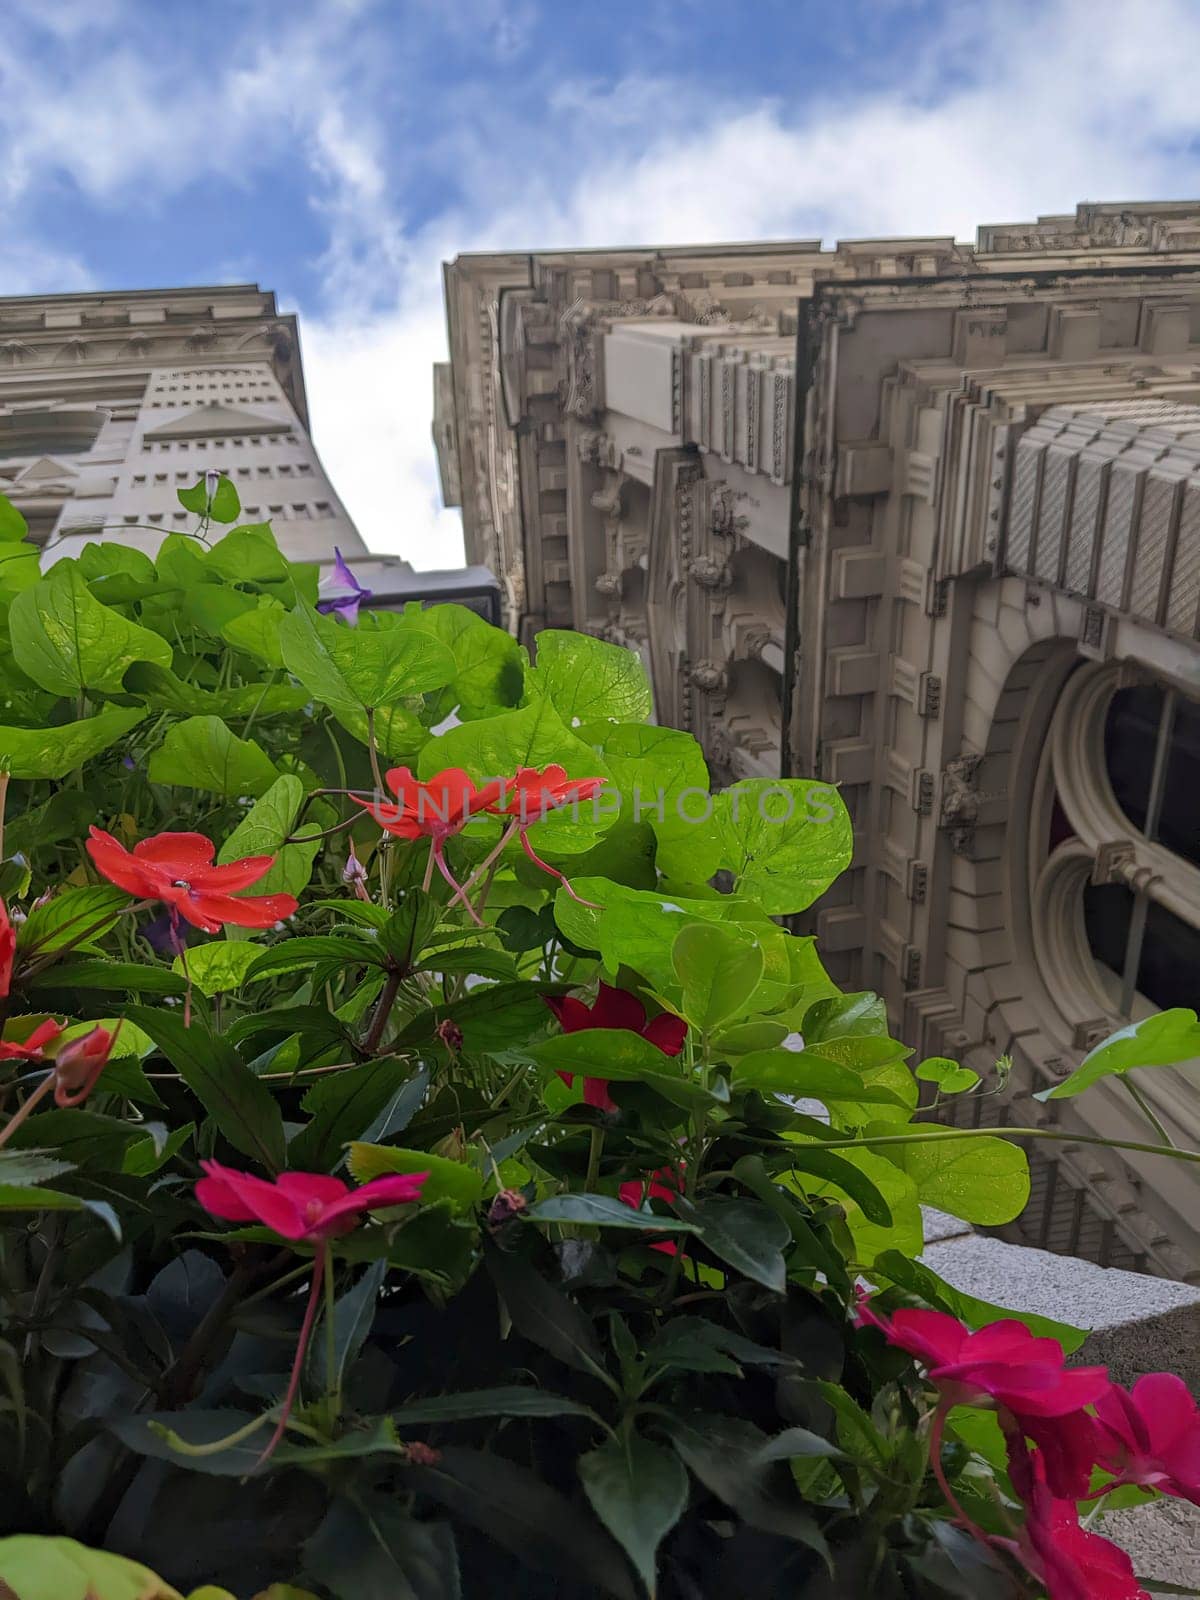 Vibrant flowers meet historic Chicago architecture under a clear sky, a symbol of urban renewal and nature-city harmony in Illinois